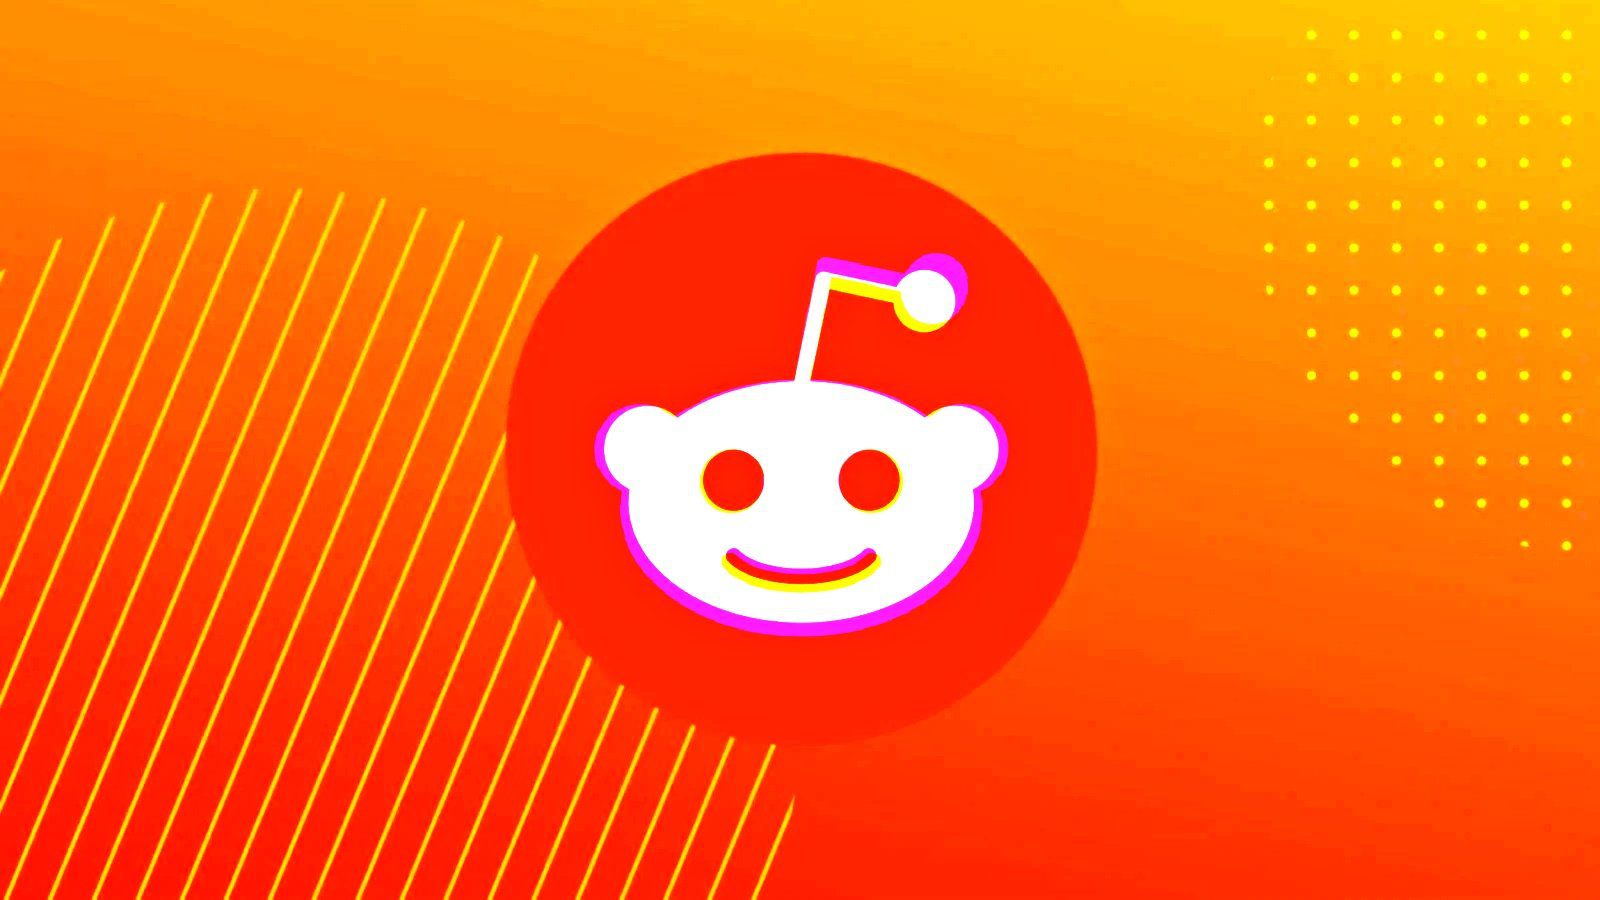 Reddit is down, not loading content for mobile app users